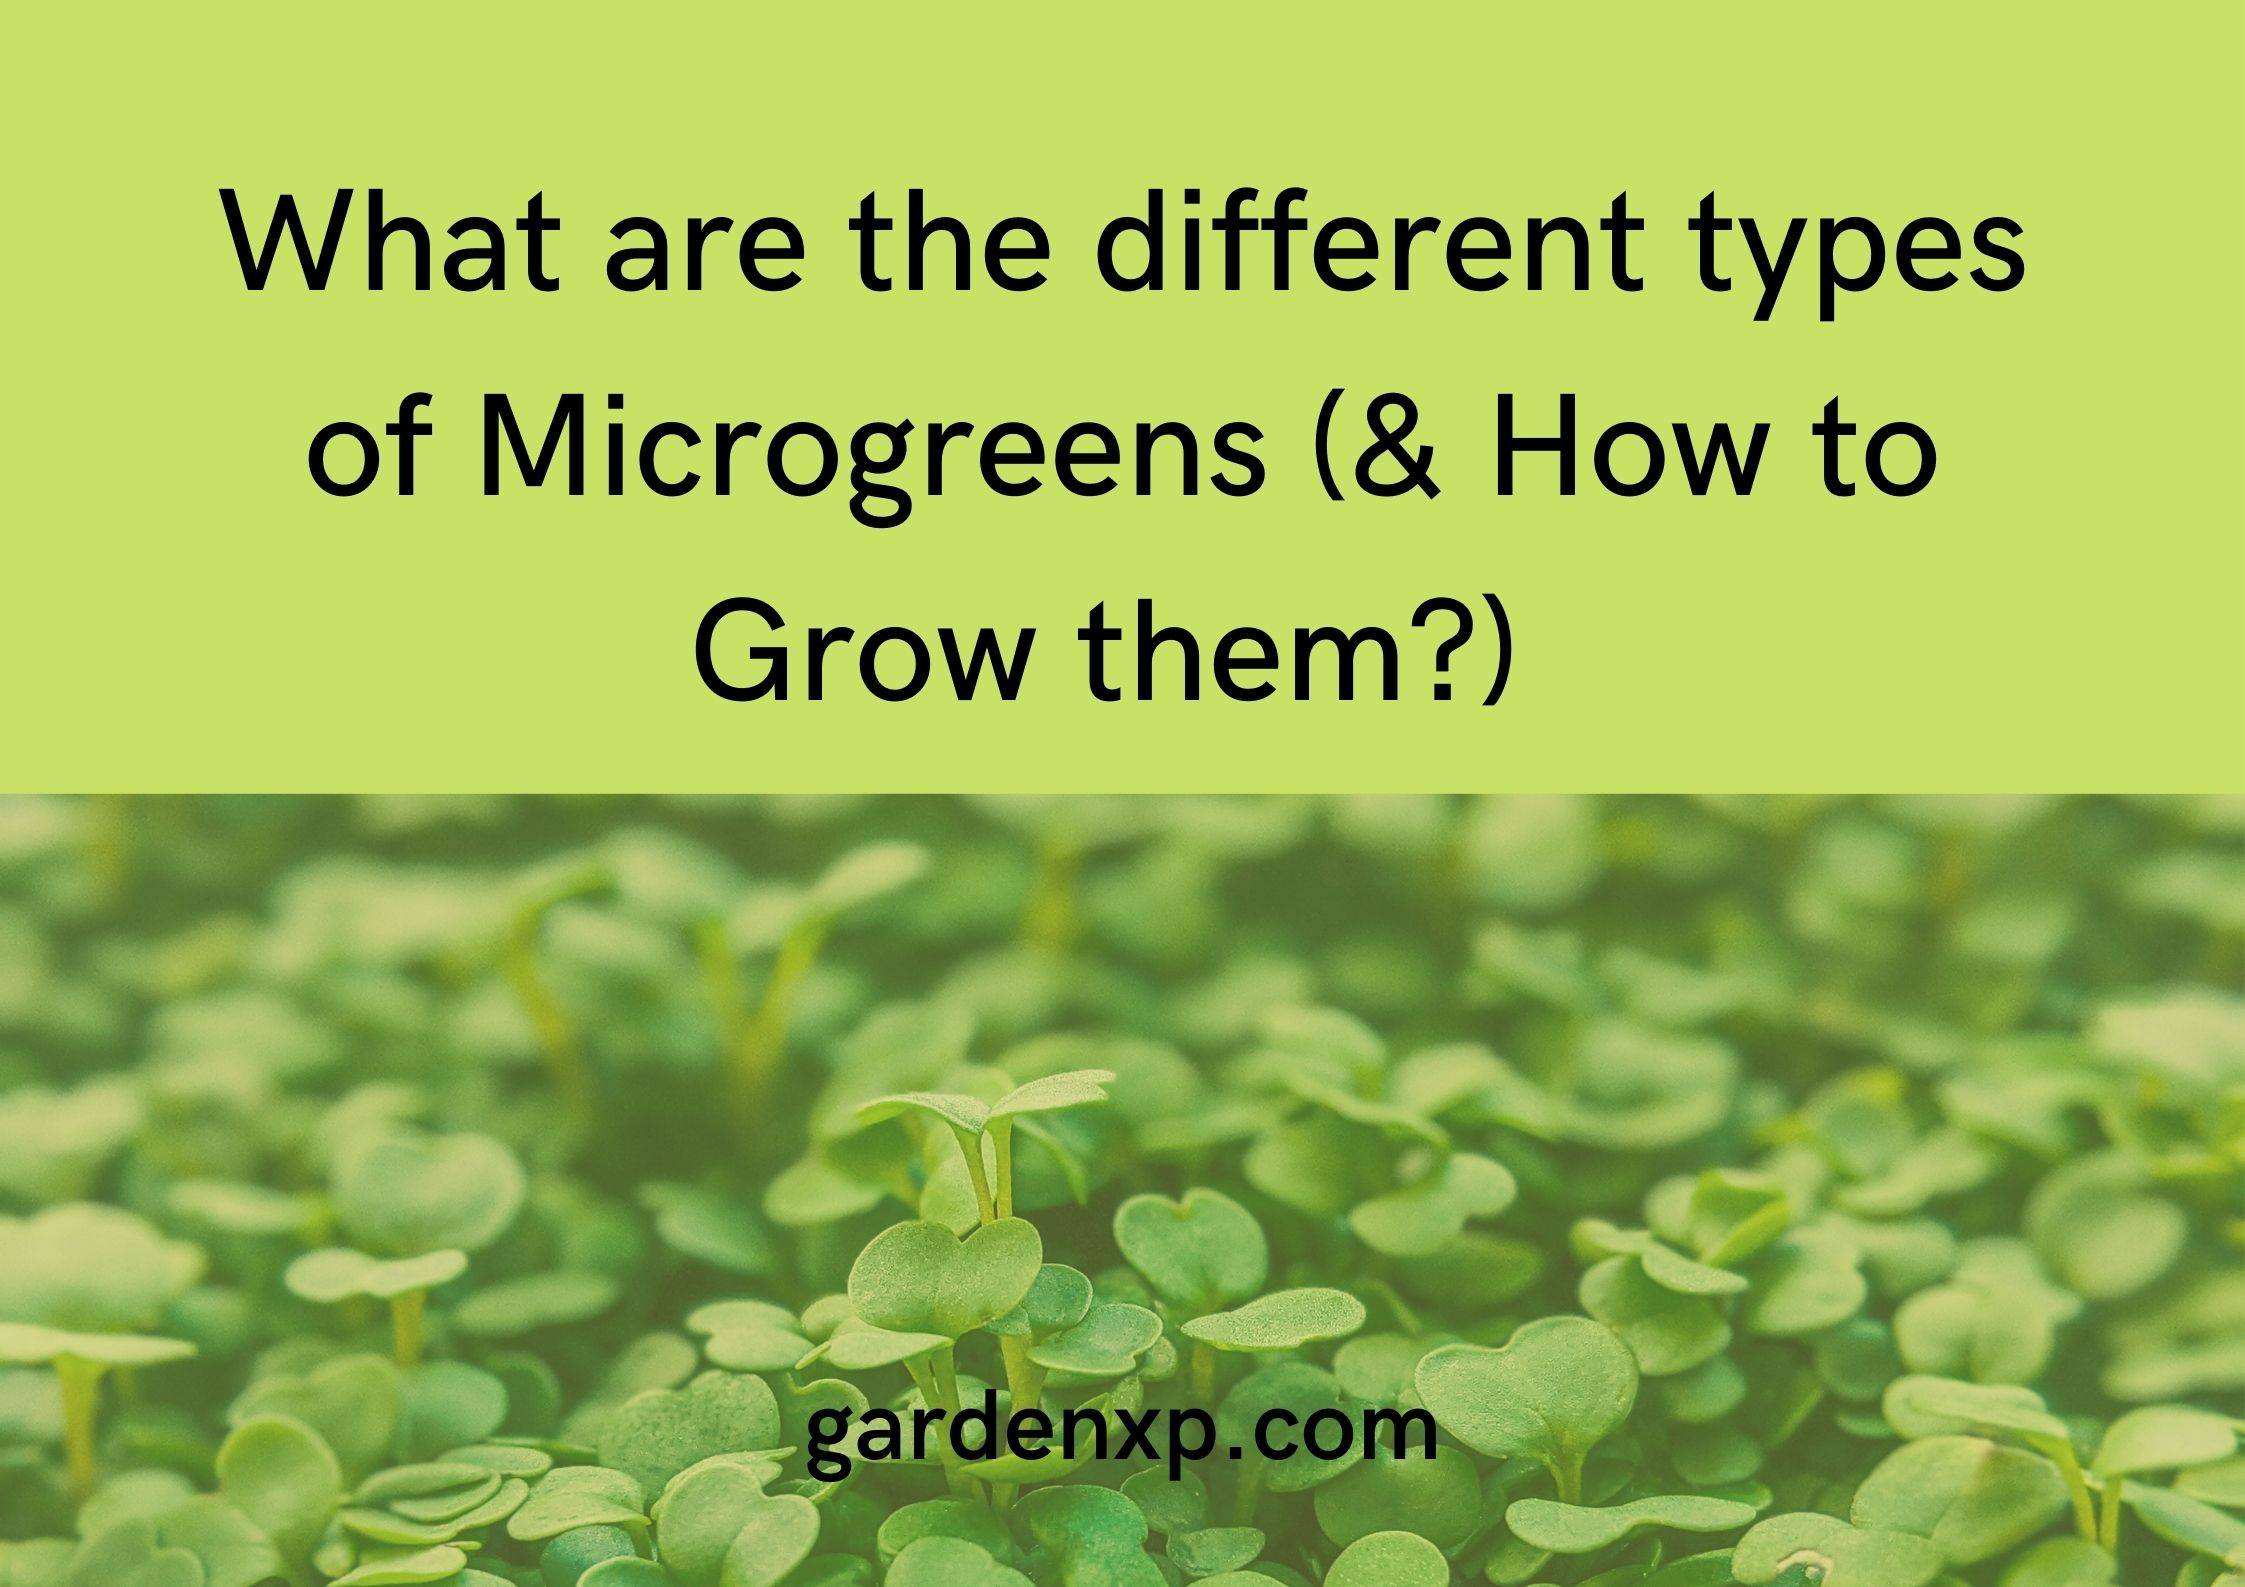 What are the different types of Microgreens? (& How to Grow them?) 